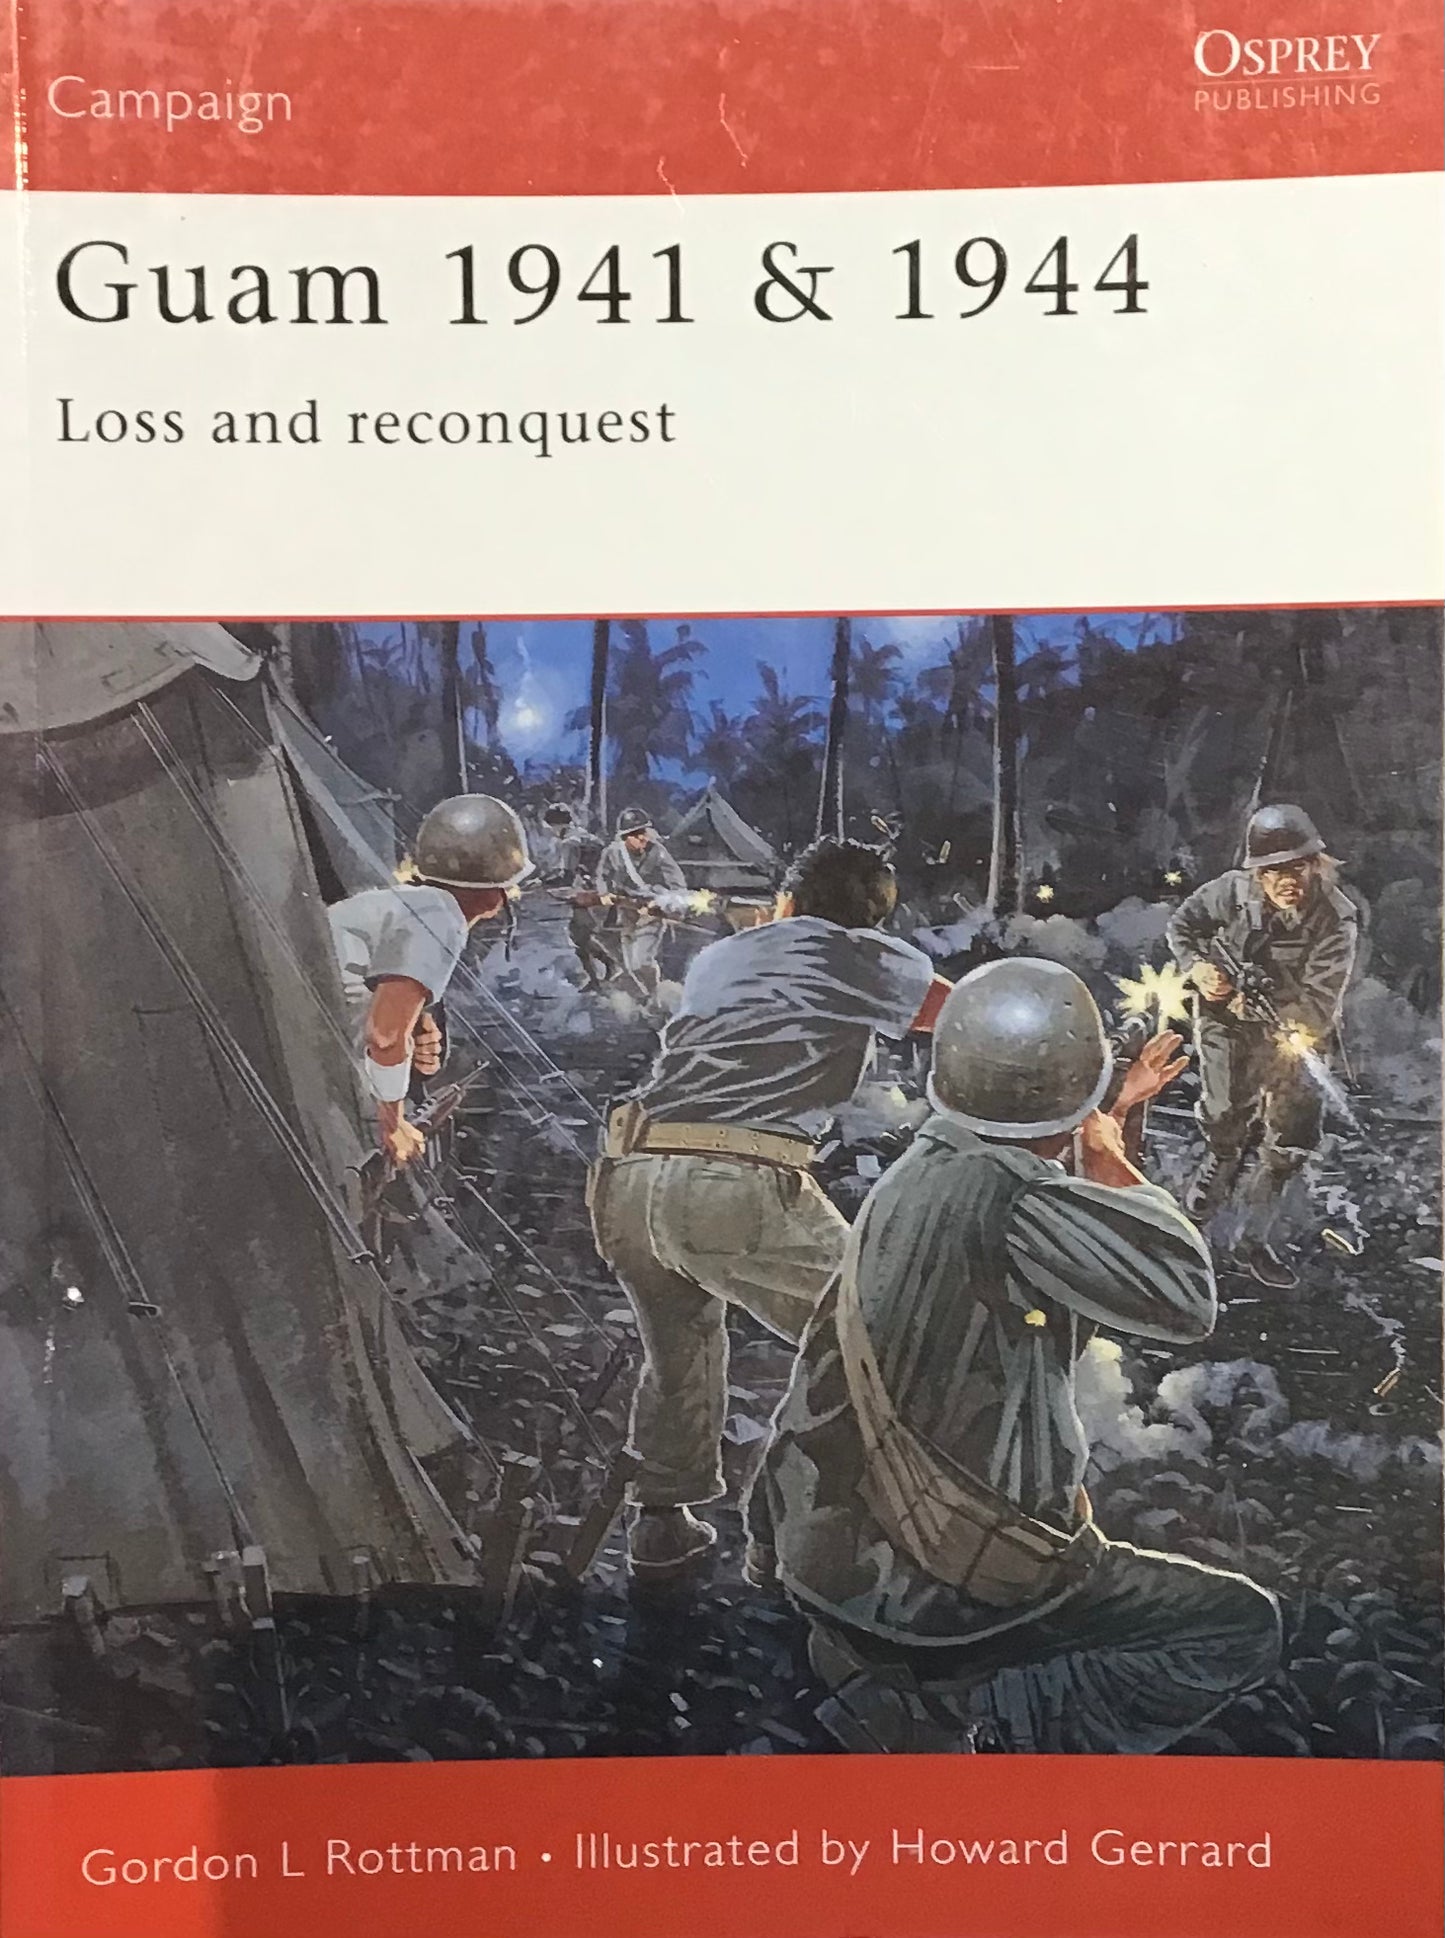 Guam 1941 & 1944 Loss and Reconquest by Gordon L. Rottman and Howard Gerrard - Chester Model Centre